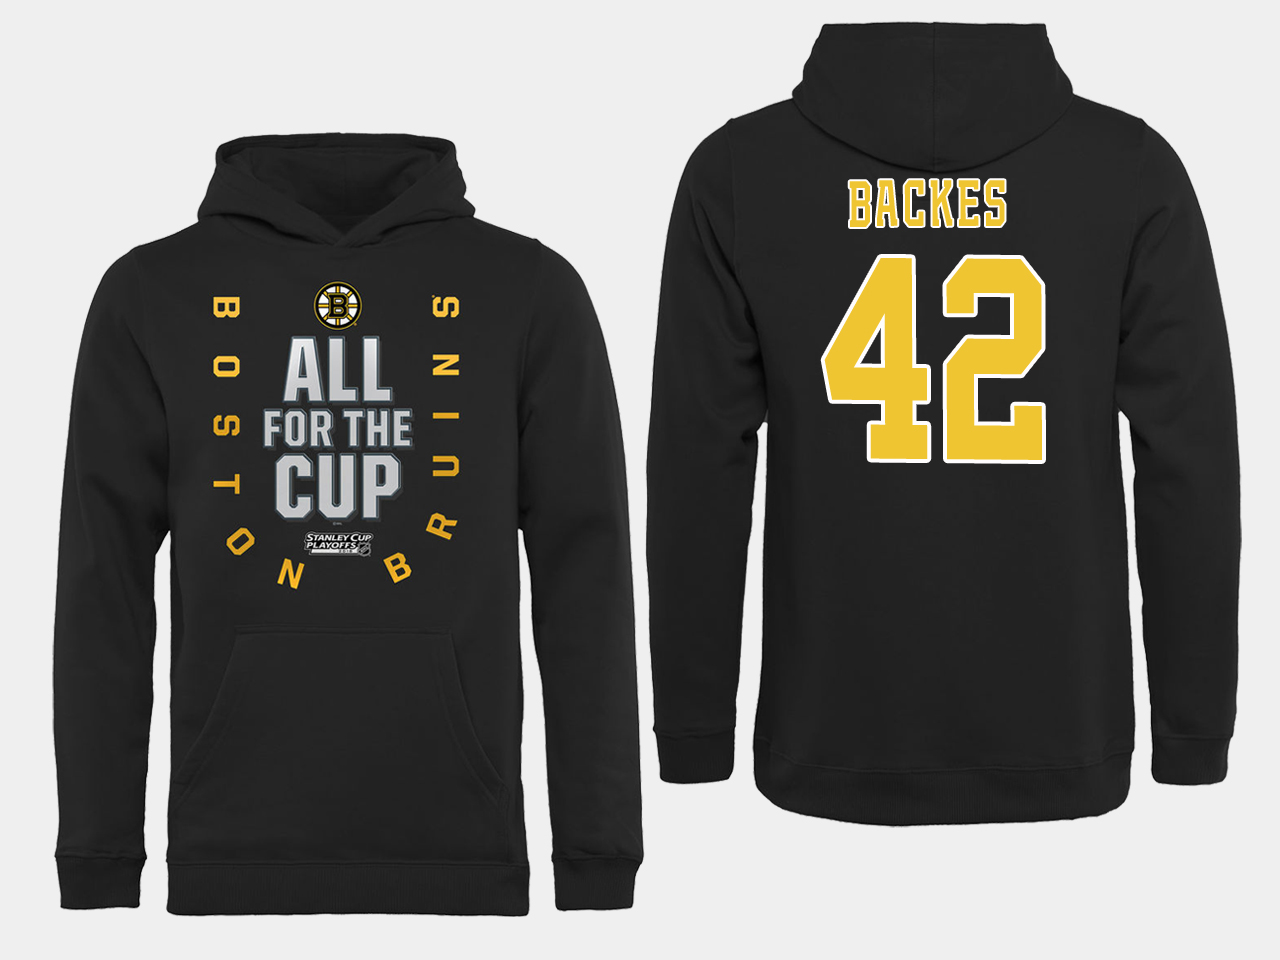 NHL Men Boston Bruins #42 Backes Black All for the Cup Hoodie